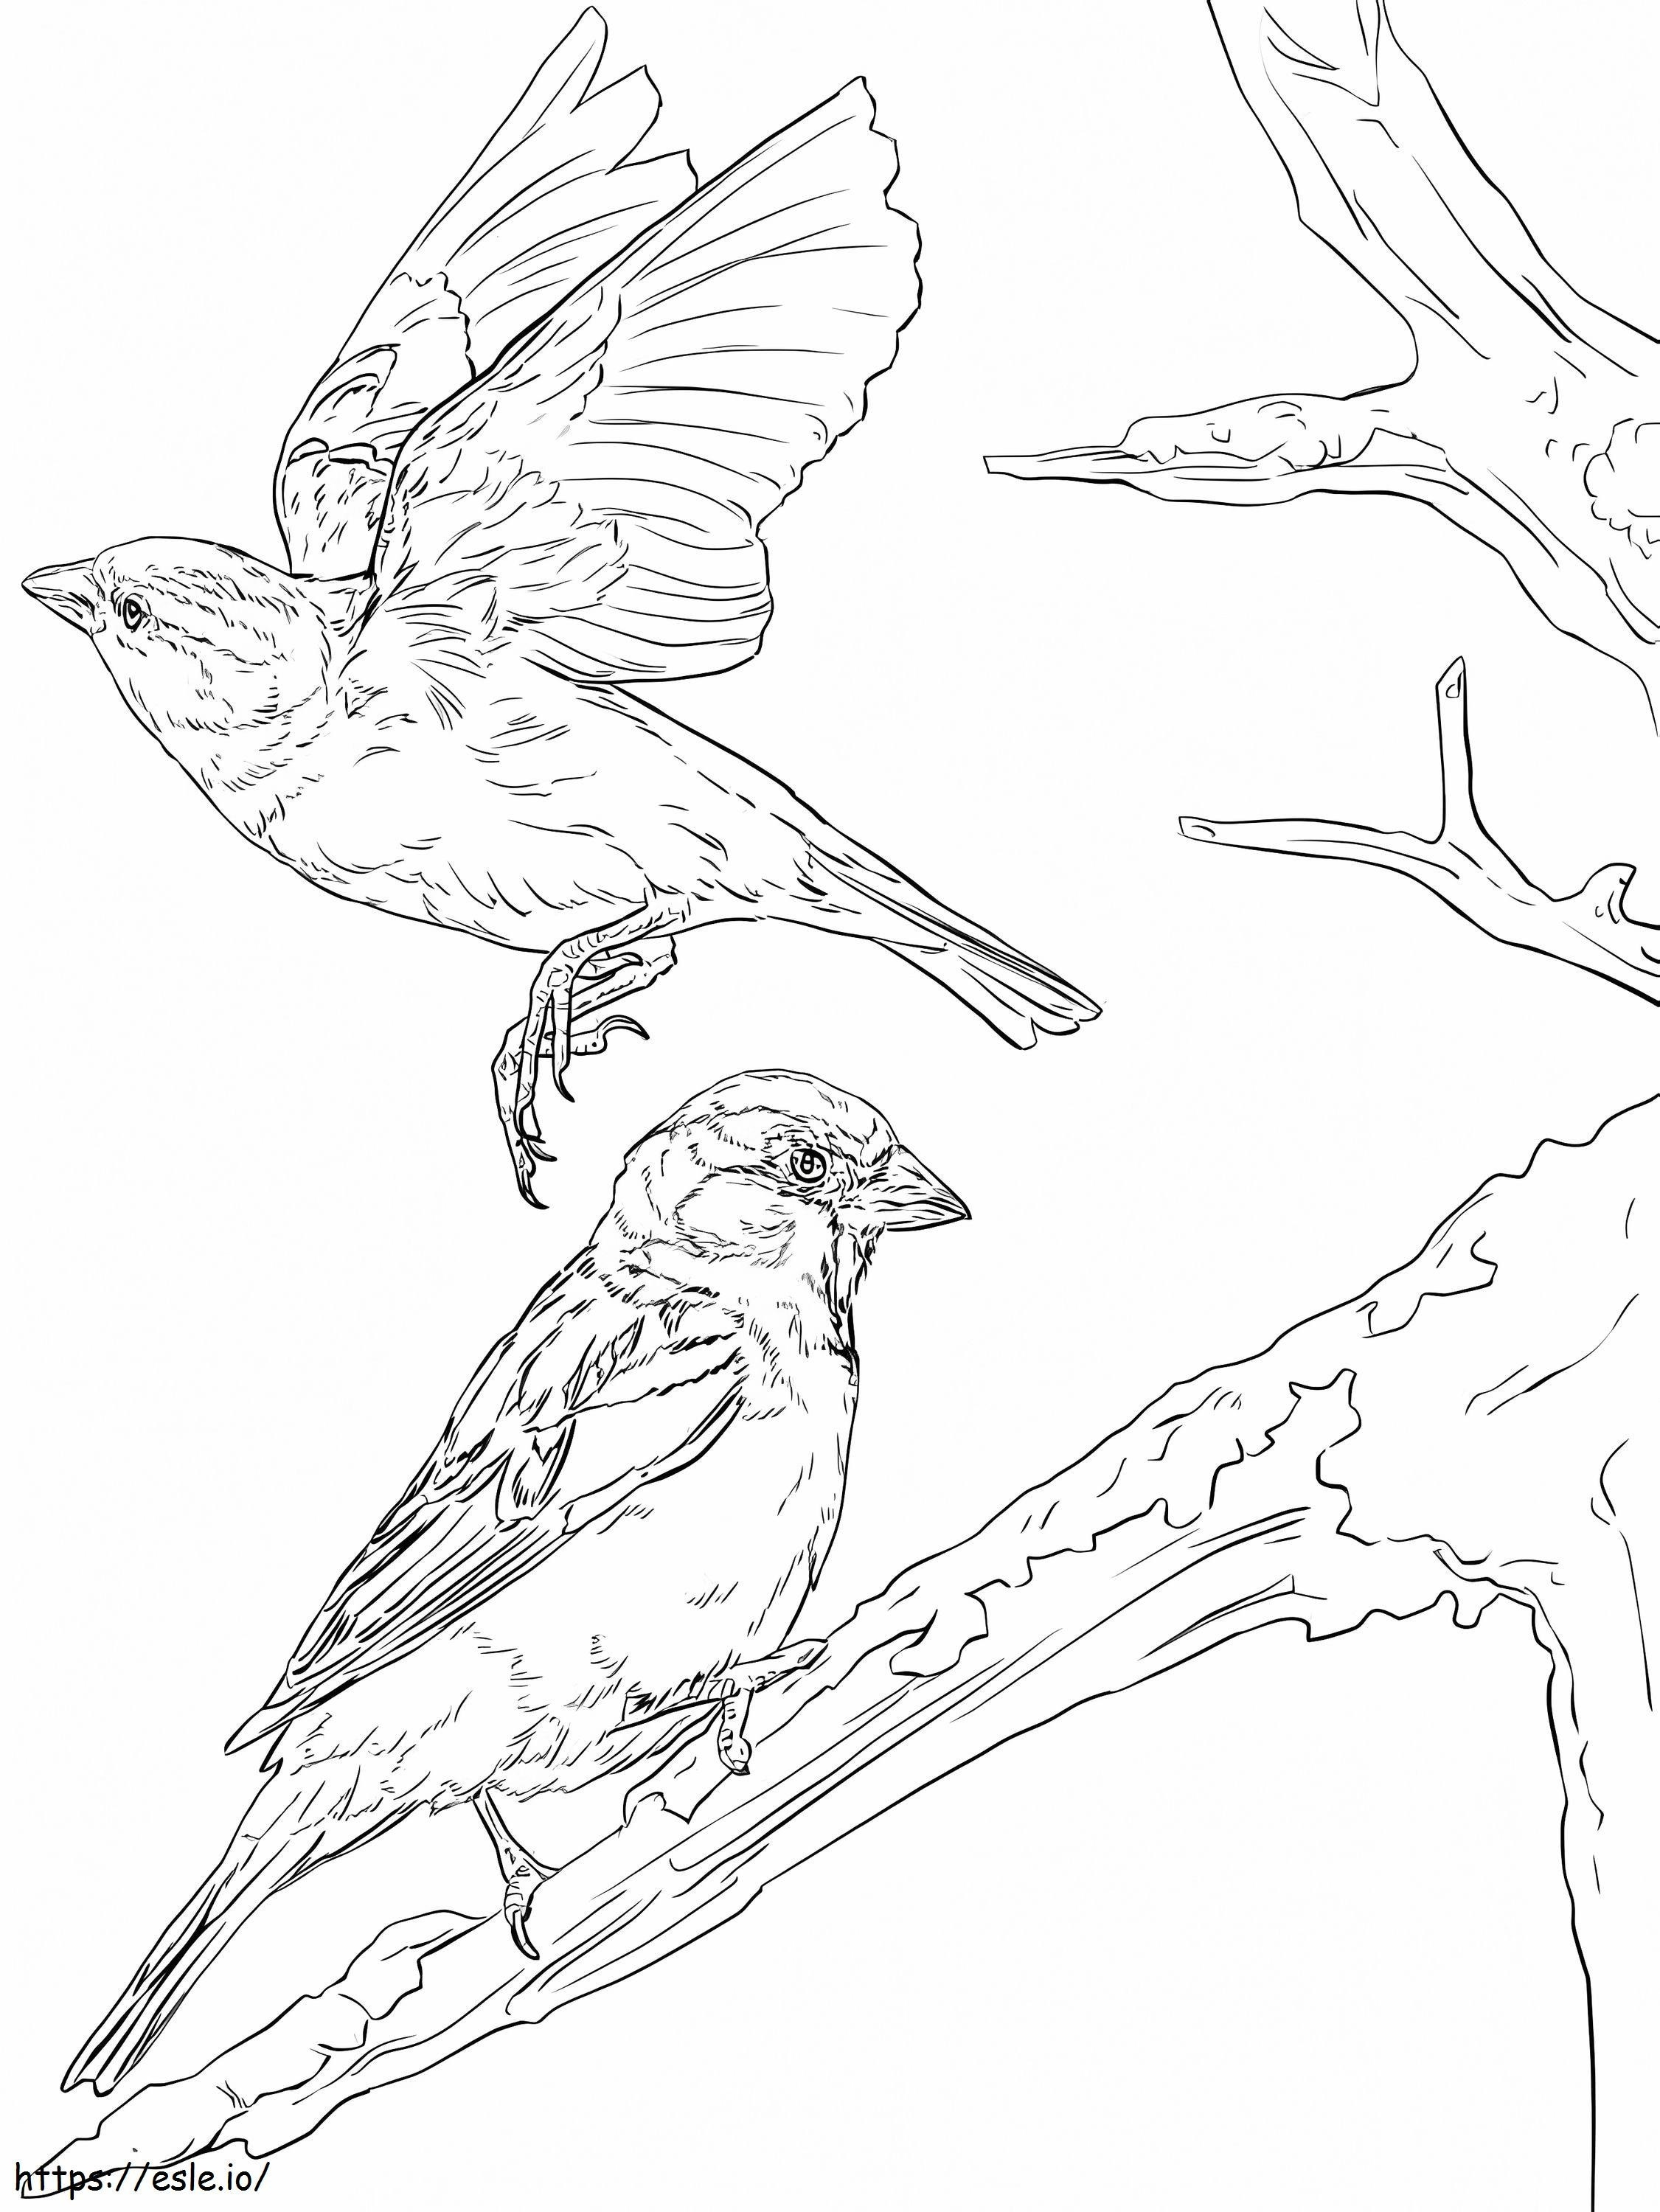 Sparrows Flying And On Tree Branch coloring page